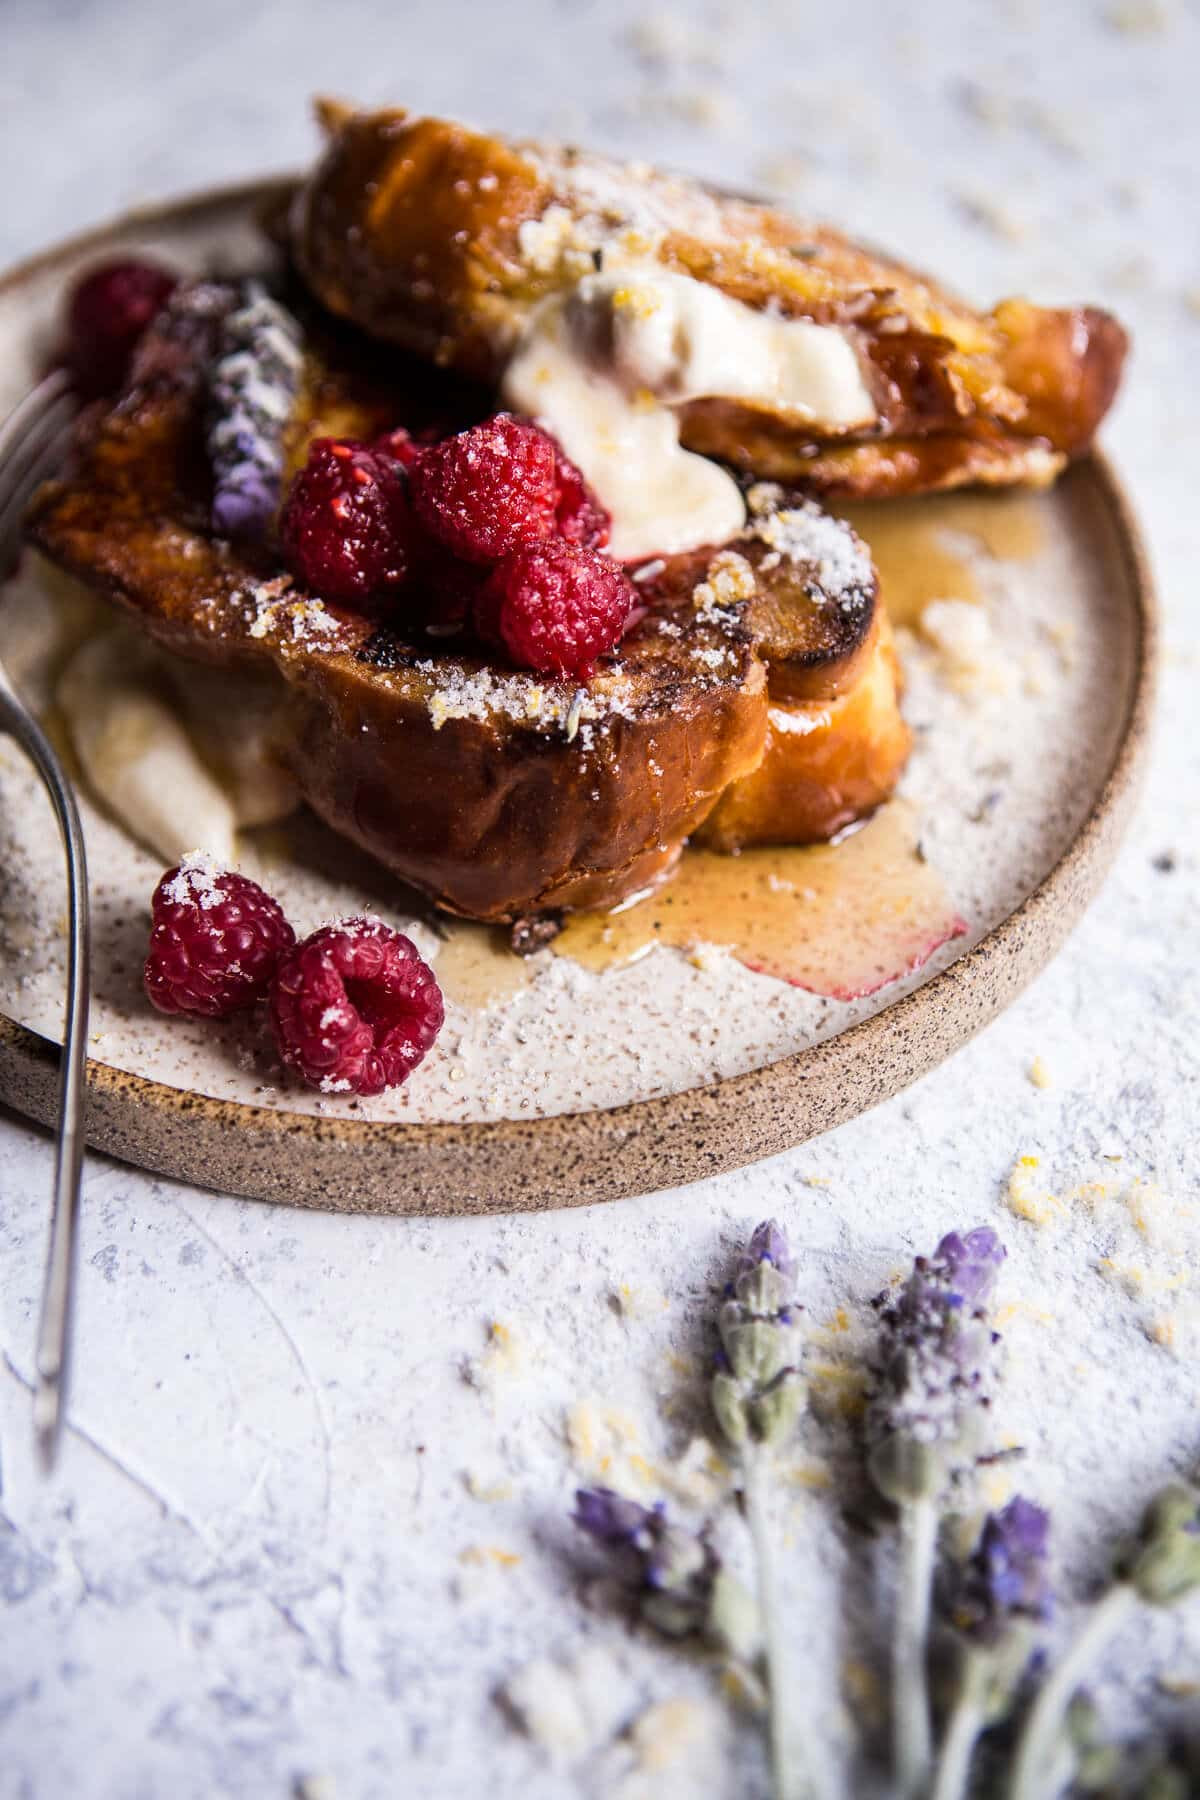 Cream Cheese Stuffed French Toast
 Whipped Cream Cheese Stuffed French Toast with Raspberries